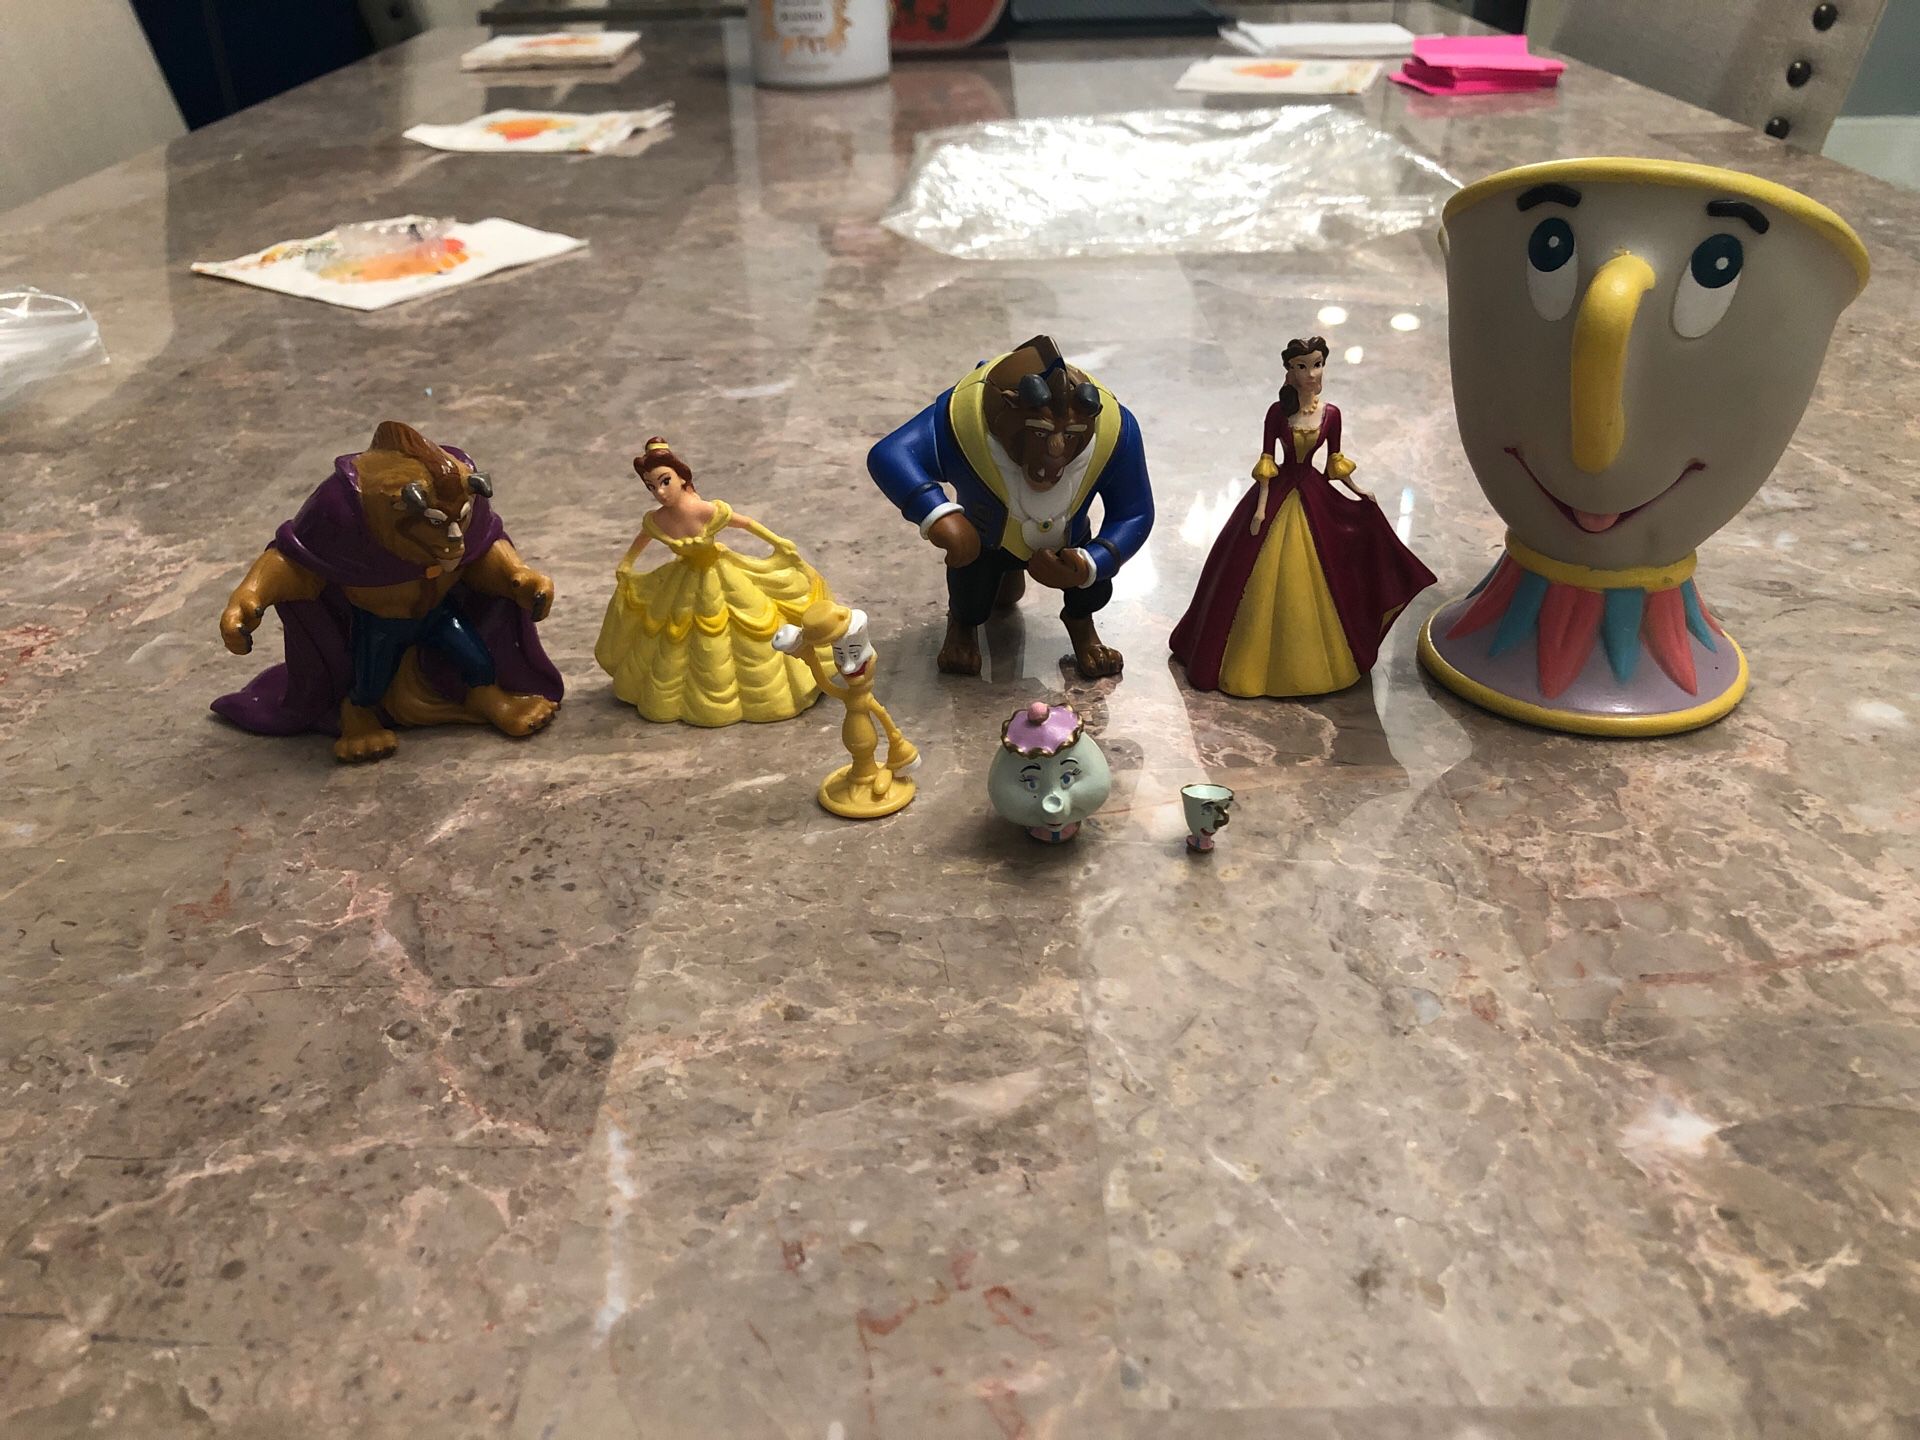 Beauty and the beast cake toppers. Belle, Beast, Ms. Potts, Chip & Lumiére